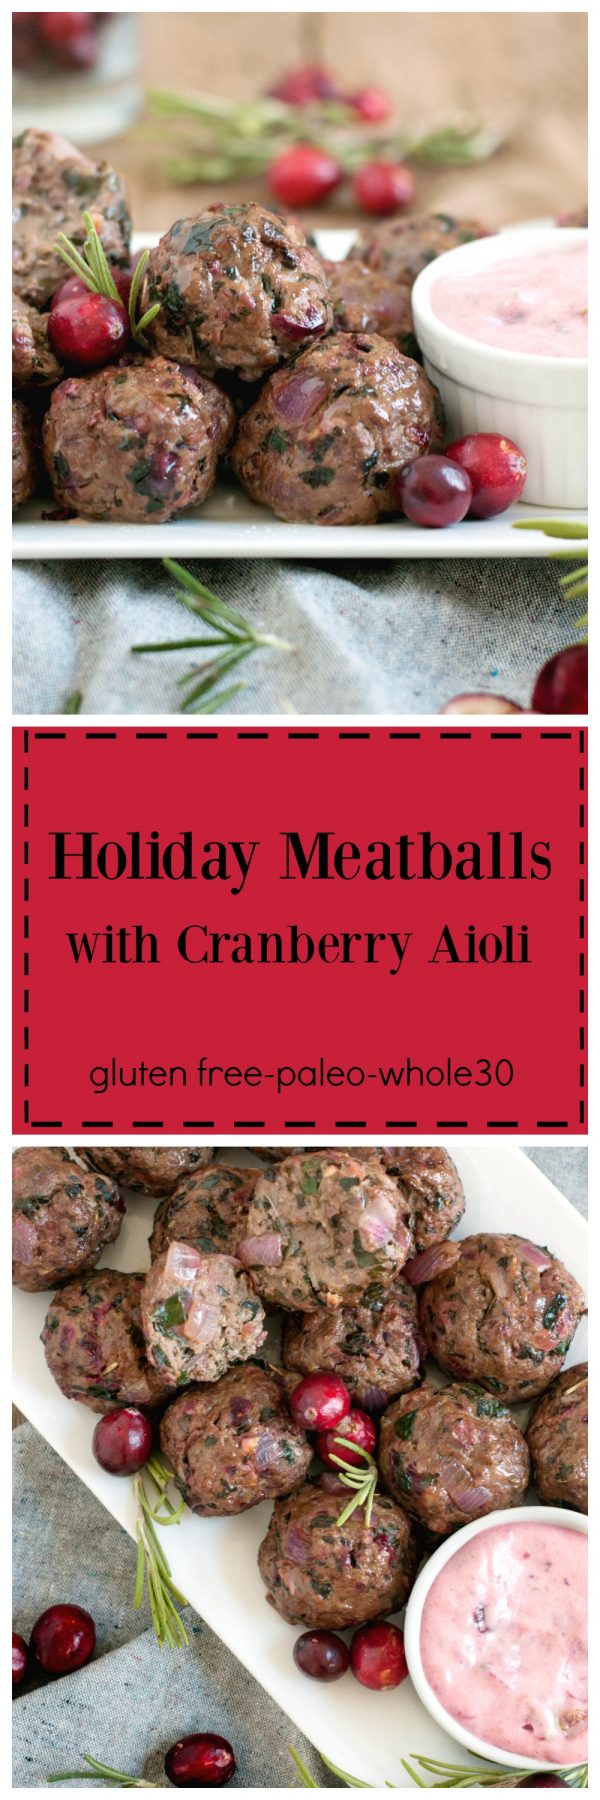 Holiday Meatballs with Cranberry Aioli - The Organic Dietitian